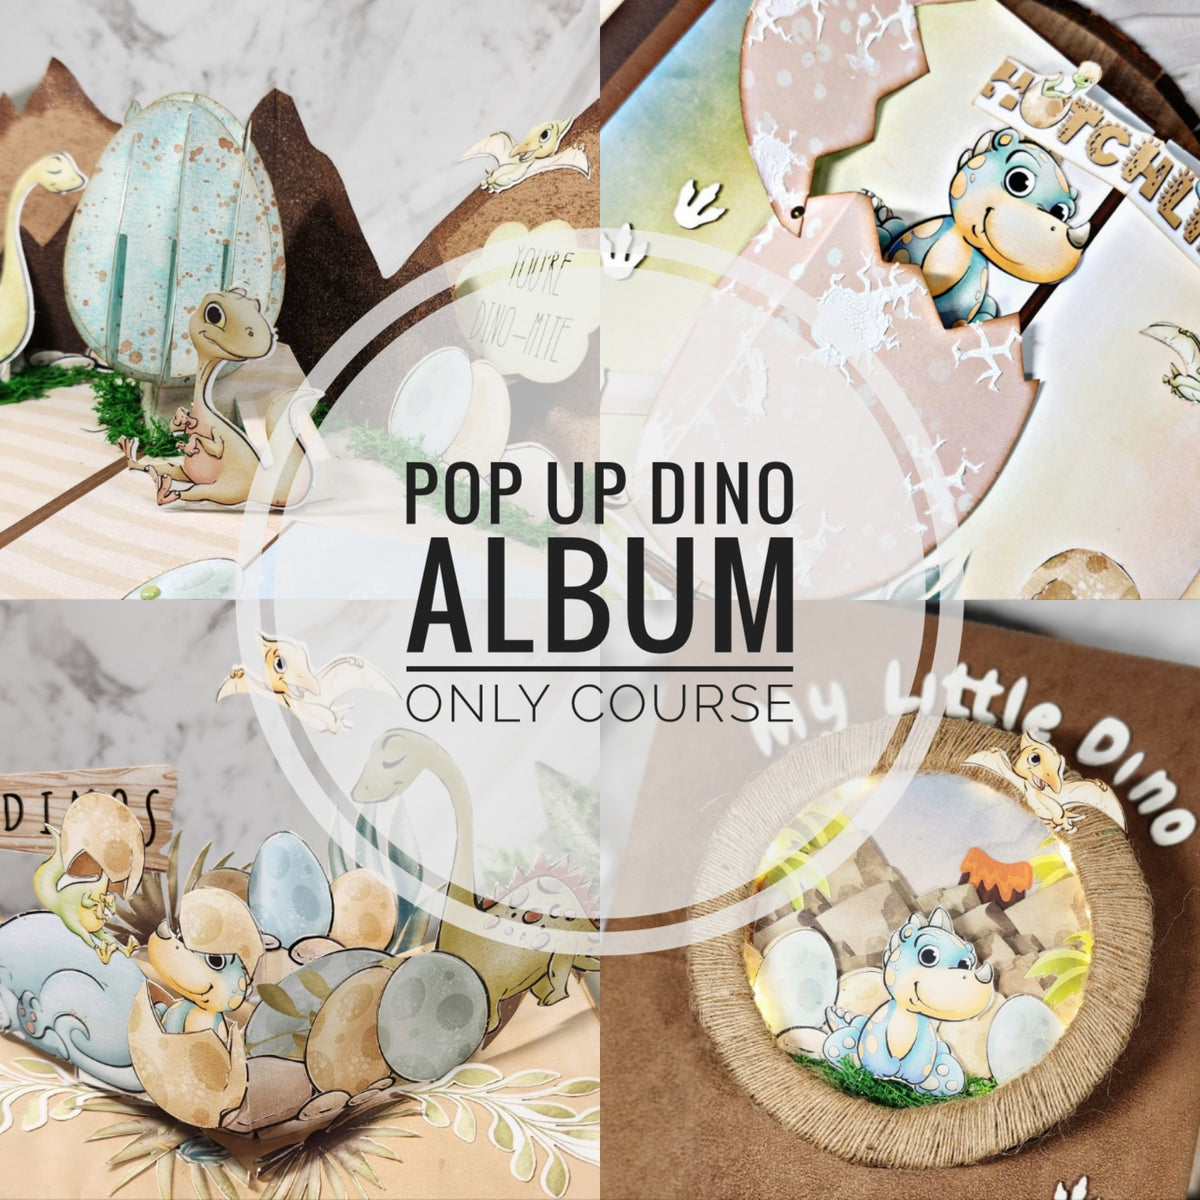 Pop Up Dino Album ONLY COURSE